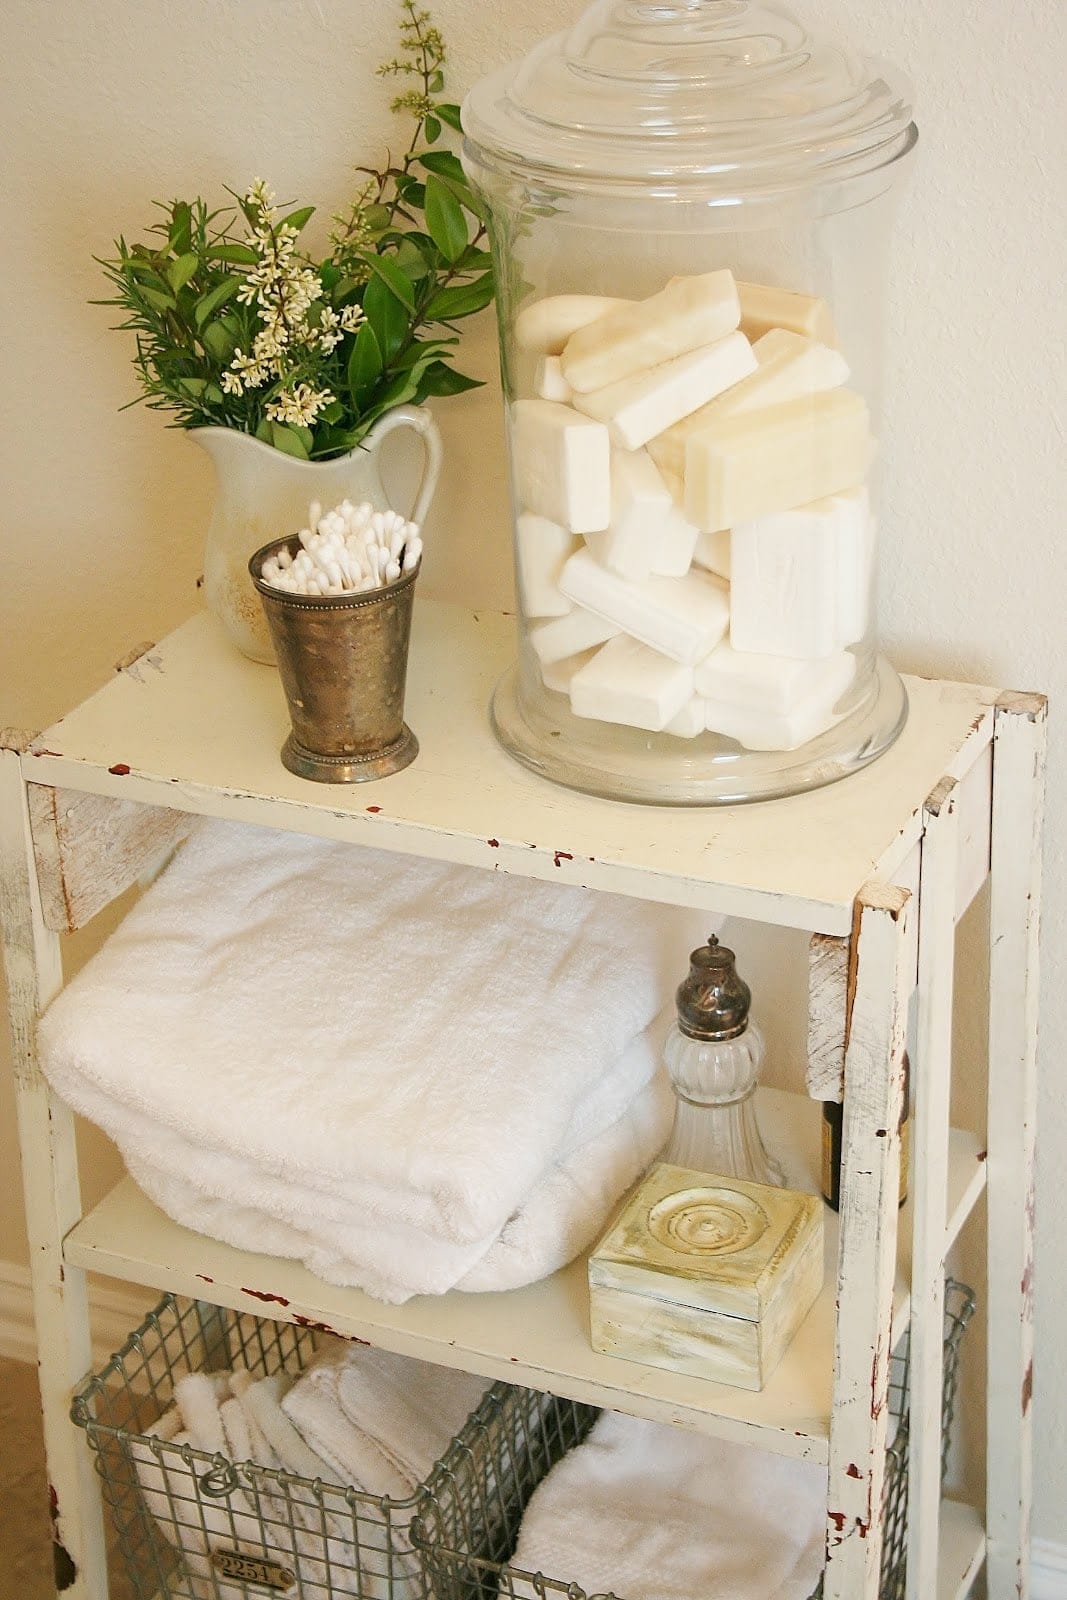 A glass jar holding bars of soap sits on a wooden shelf